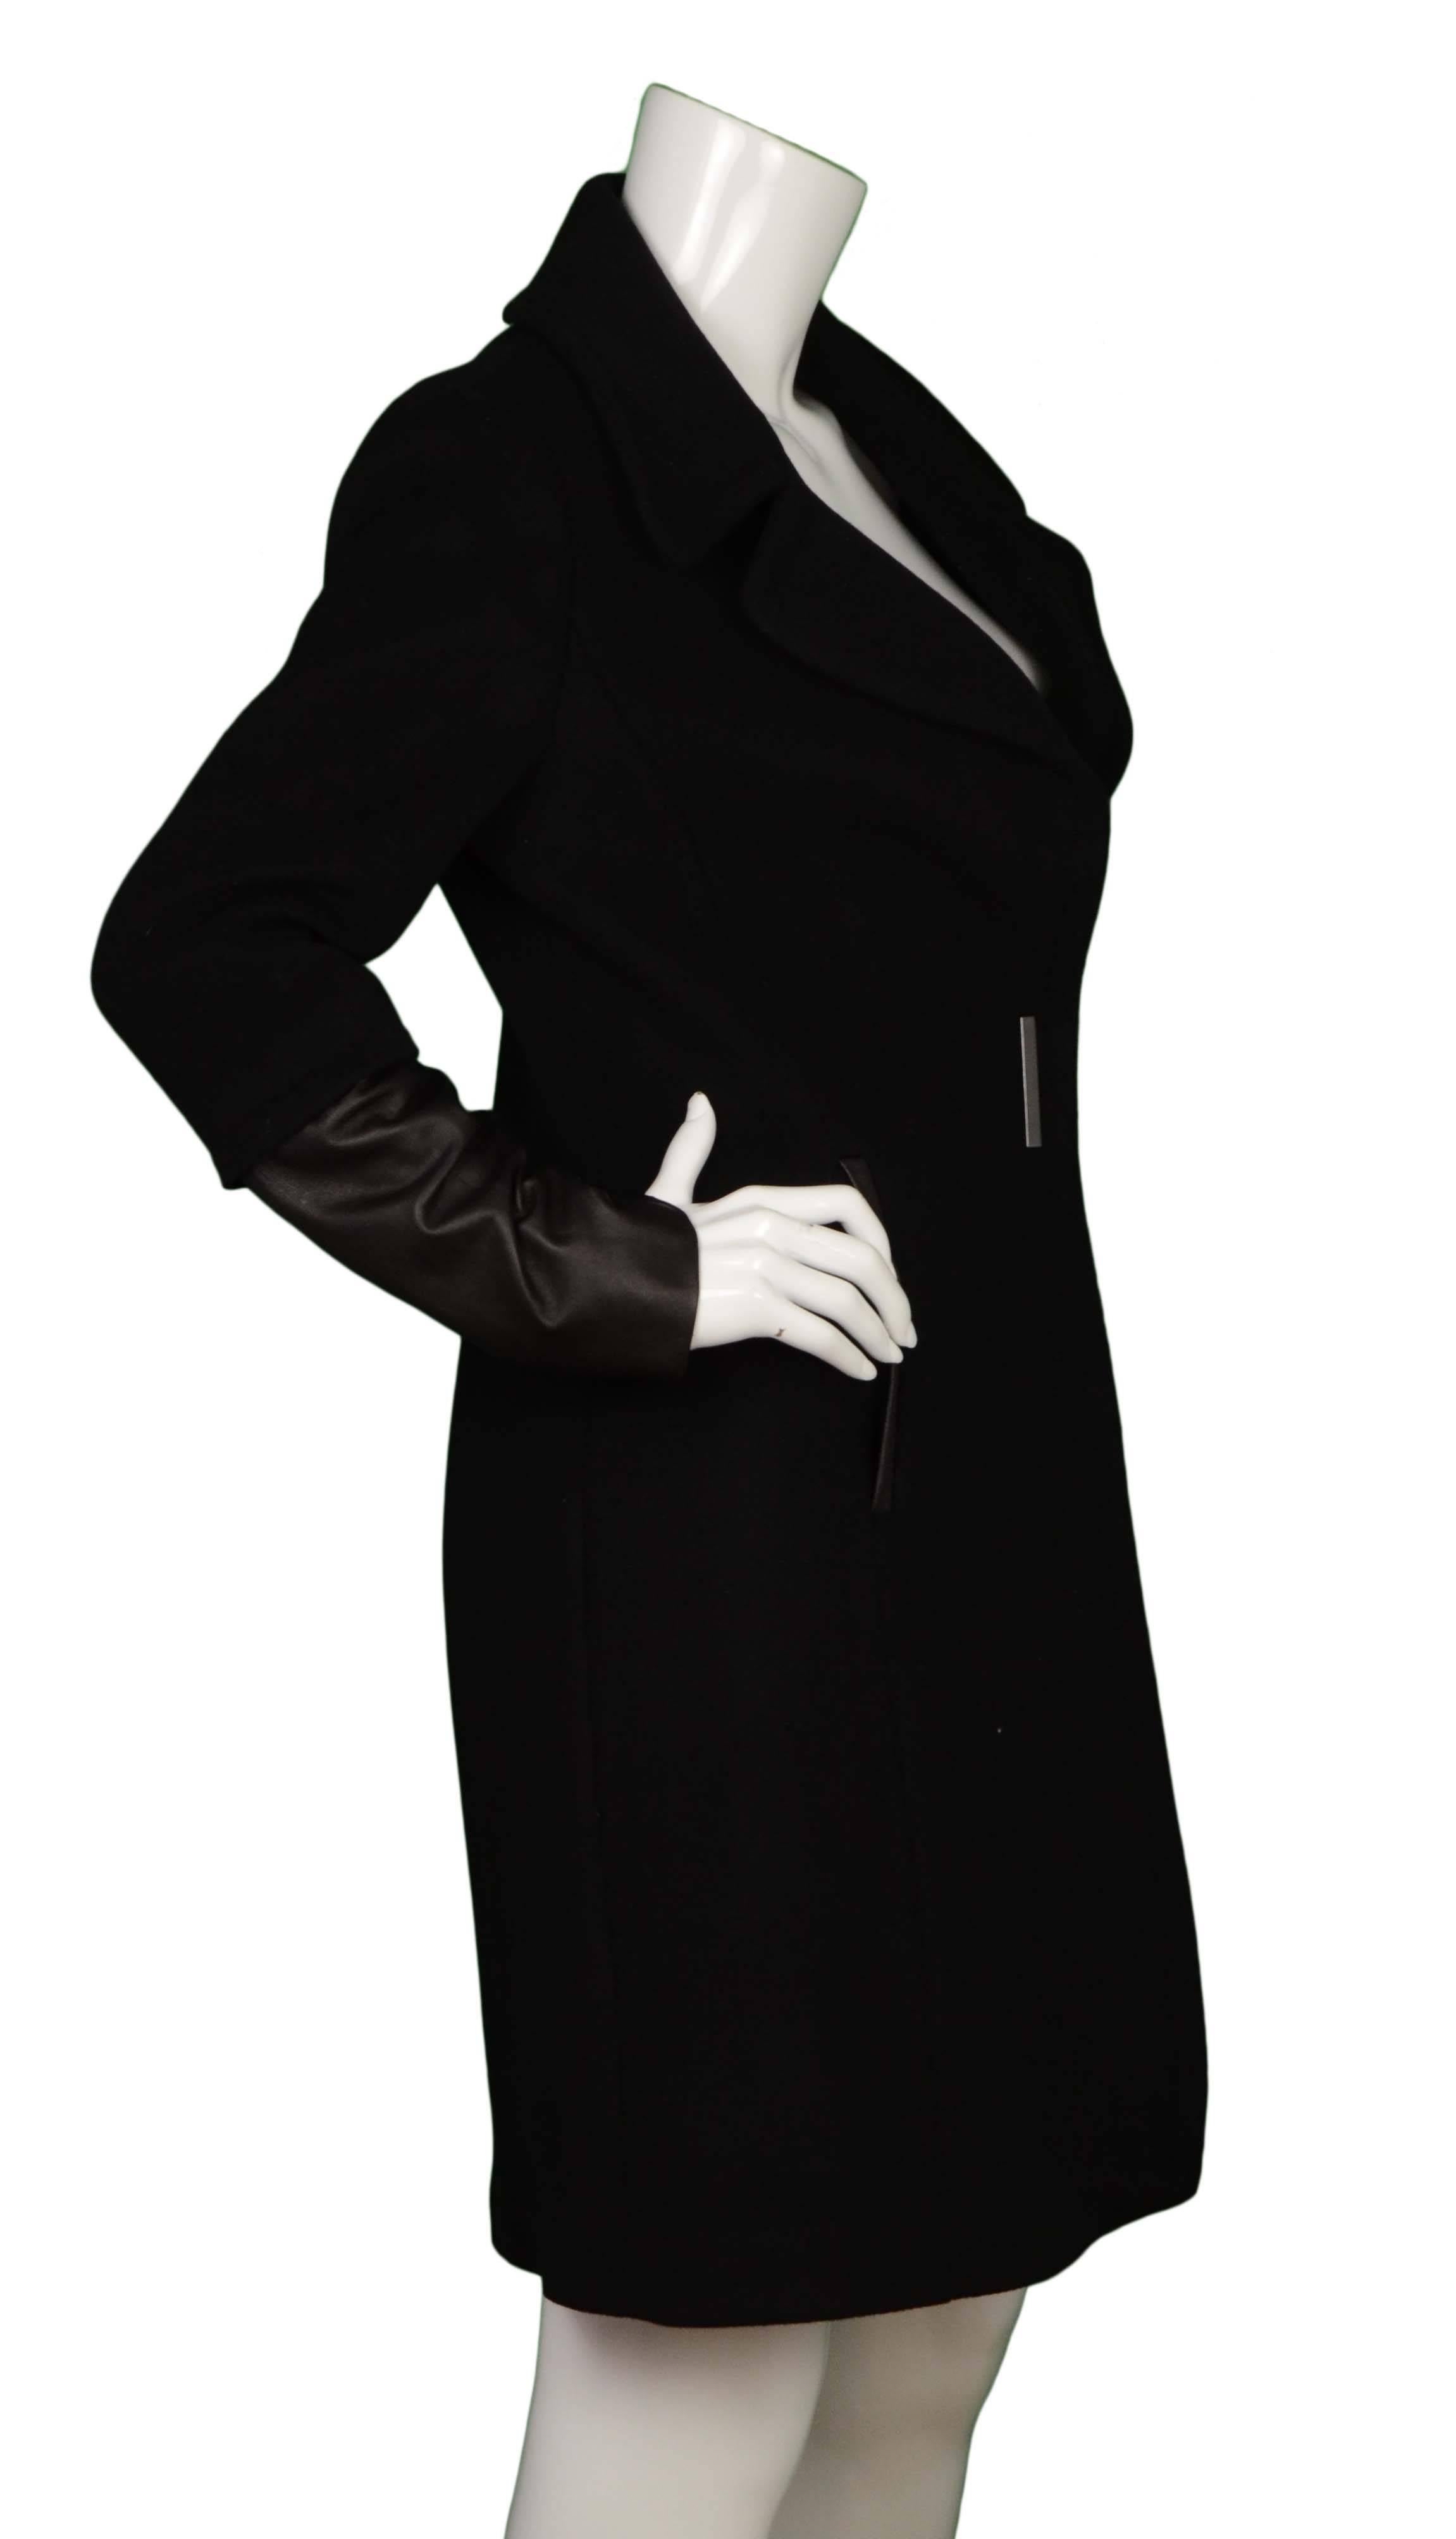 Elie Tahari Black Wool & Leather Coat 
Features leather trim and leather sleeves
Made In: China
Color: Black
Composition: 100% wool, 100% leather
Lining: Navy, 100% polyester
Closure/Opening: Front waist double snap closure
Exterior Pockets: